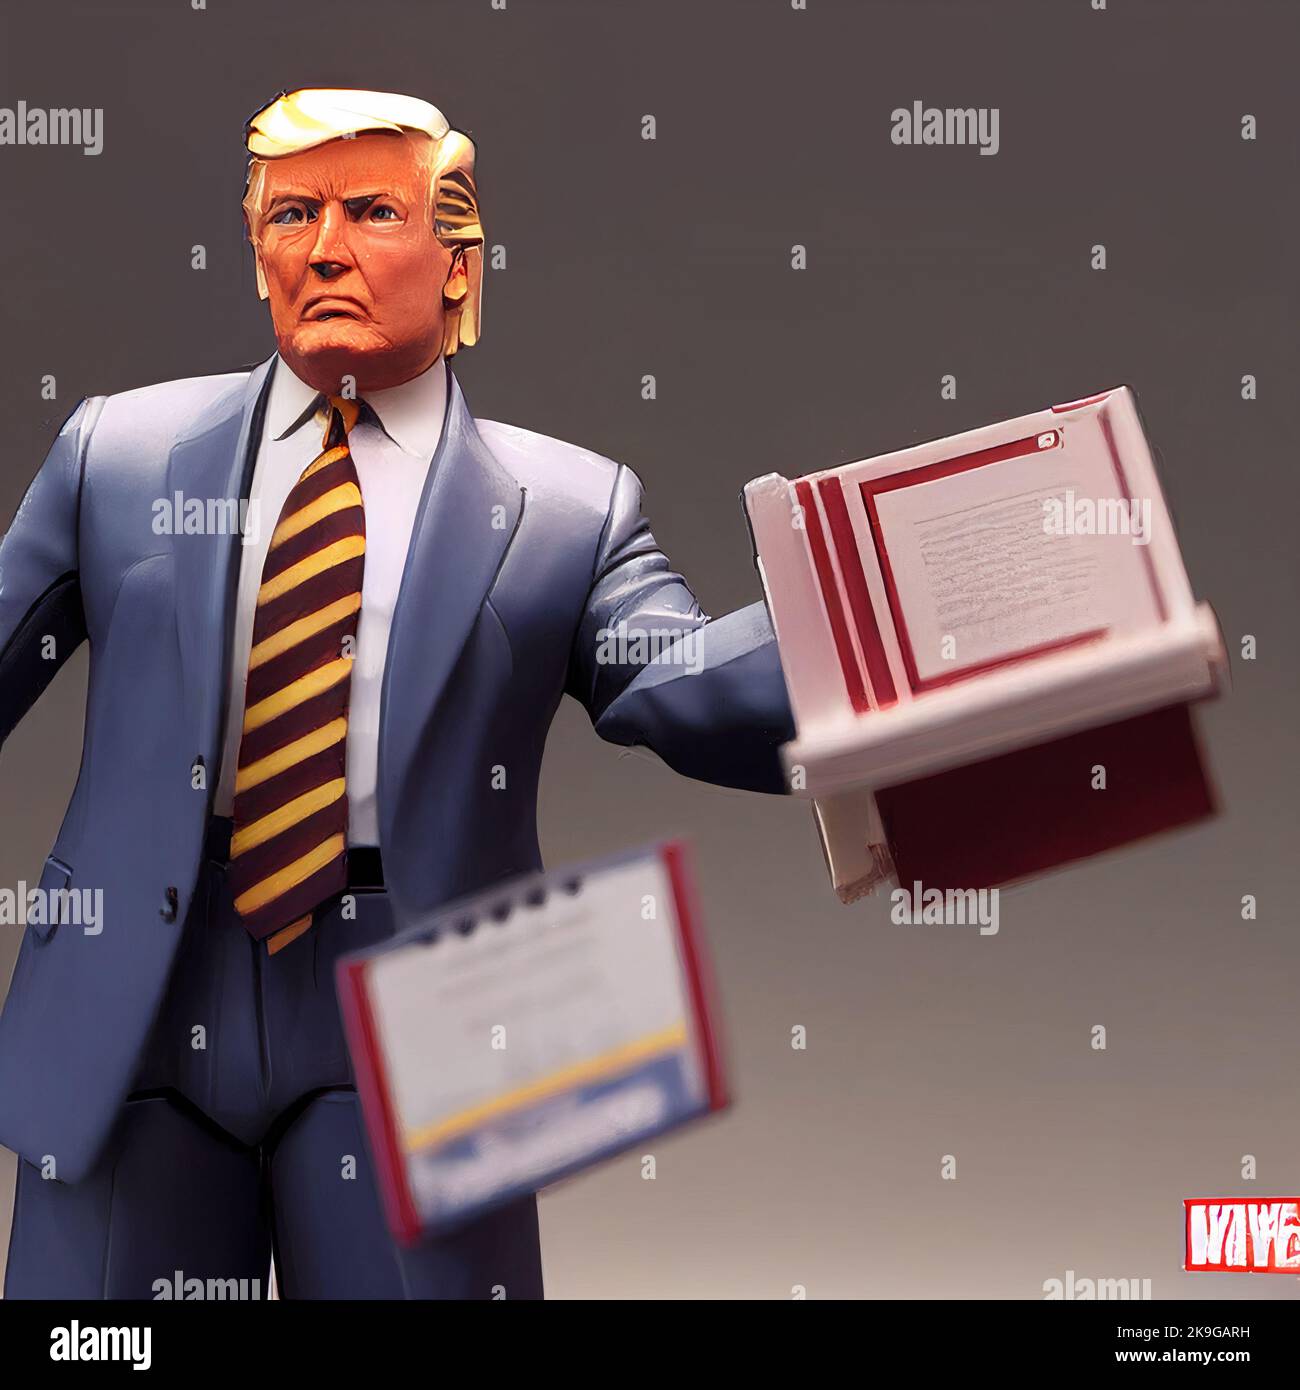 An illustrative artwork of Donald Trump with classified documents against a gray background Stock Photo